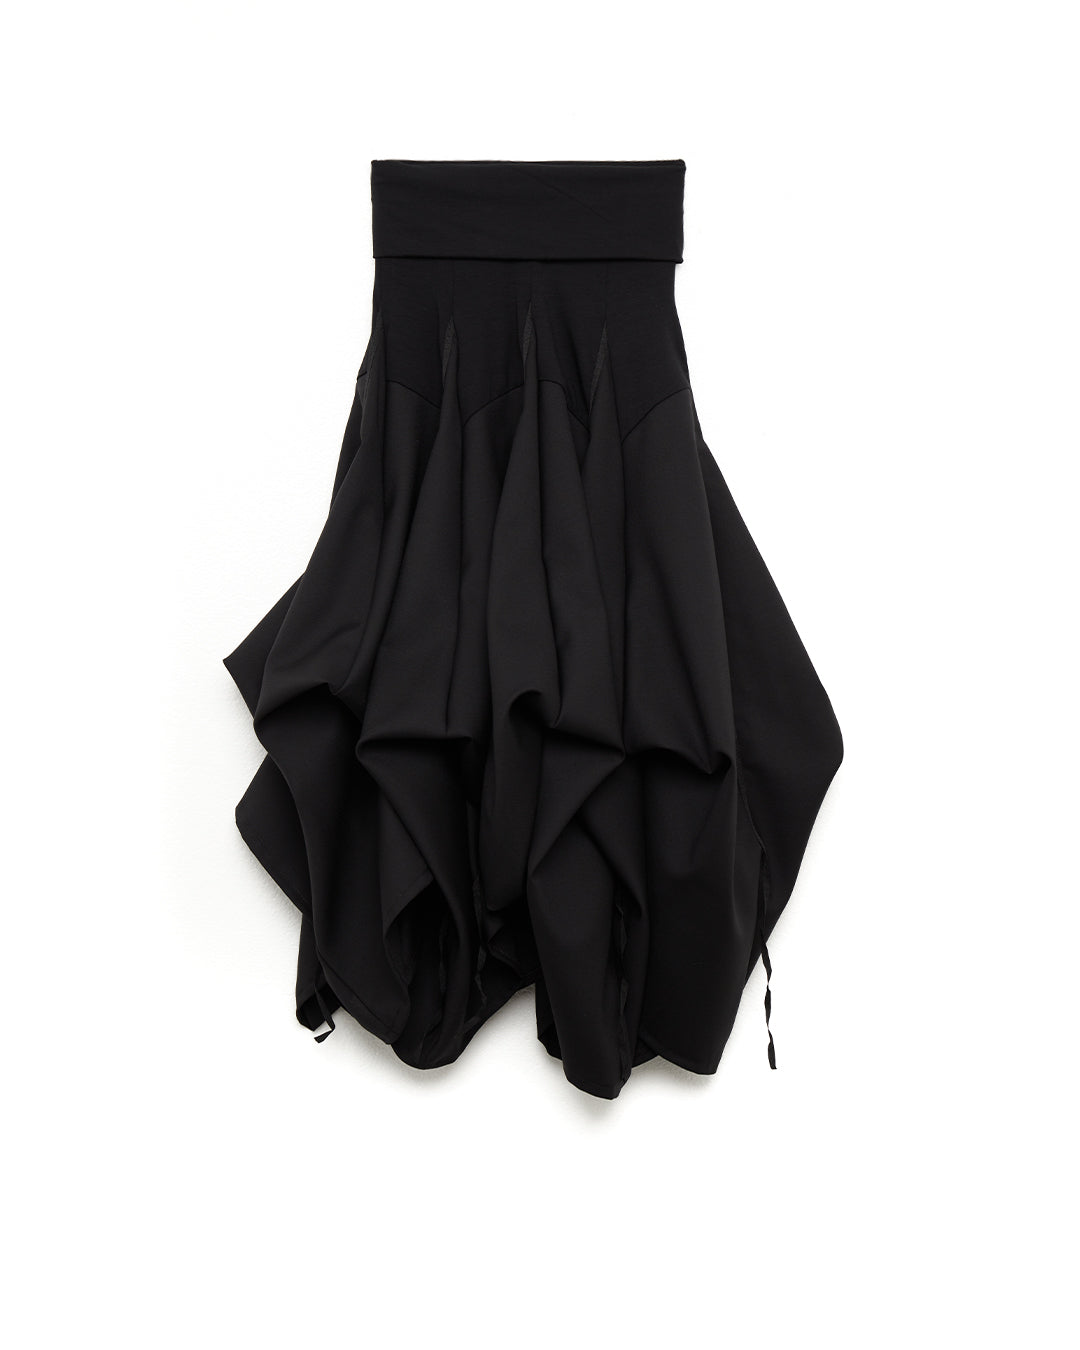 KAHE - I Want This Life And Another Skirt/Dress (Black)